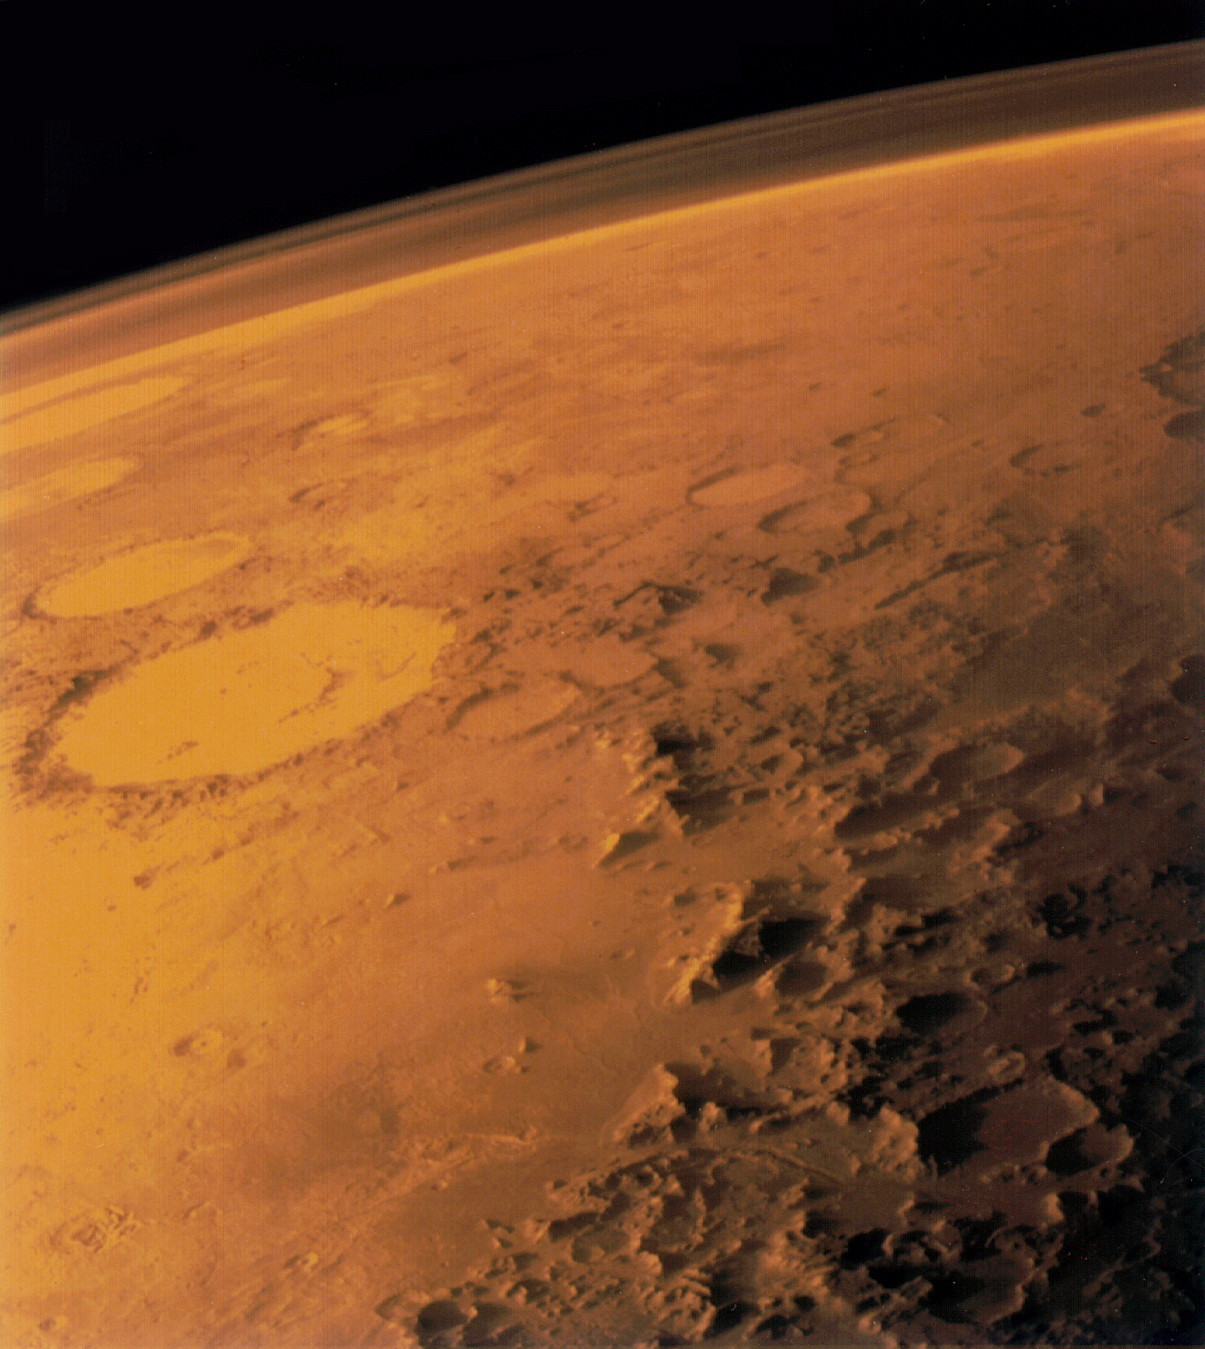 Real Martians: How to Protect Astronauts from Space Radiation on Mars